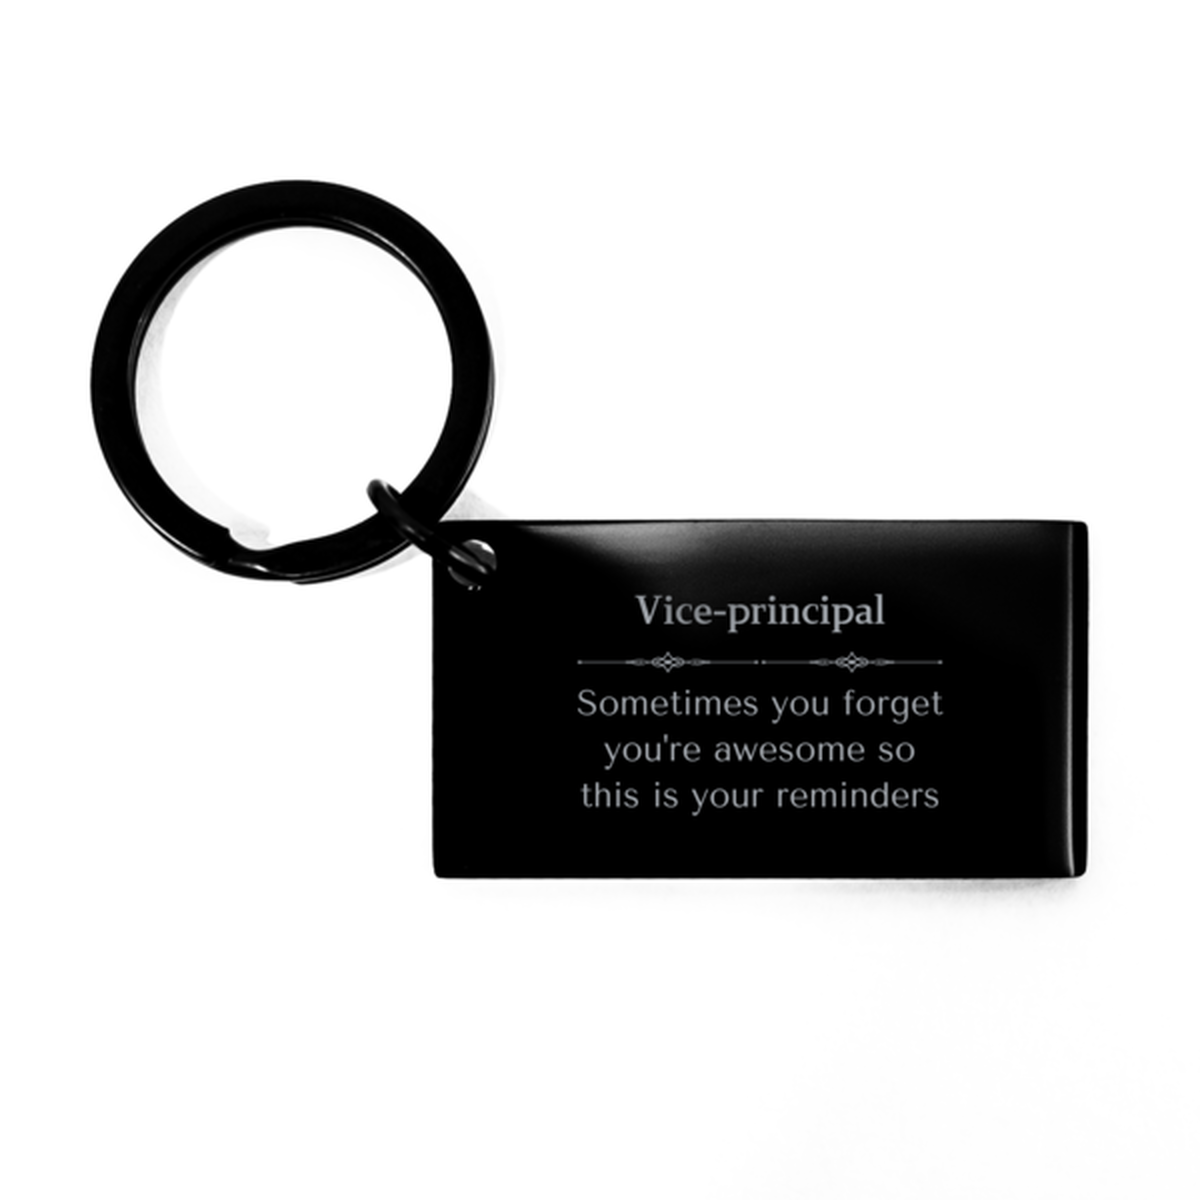 Sentimental Vice-principal Keychain, Analyst Sometimes you forget you're awesome so this is your reminders, Graduation Christmas Birthday Gifts for Vice-principal, Men, Women, Coworkers